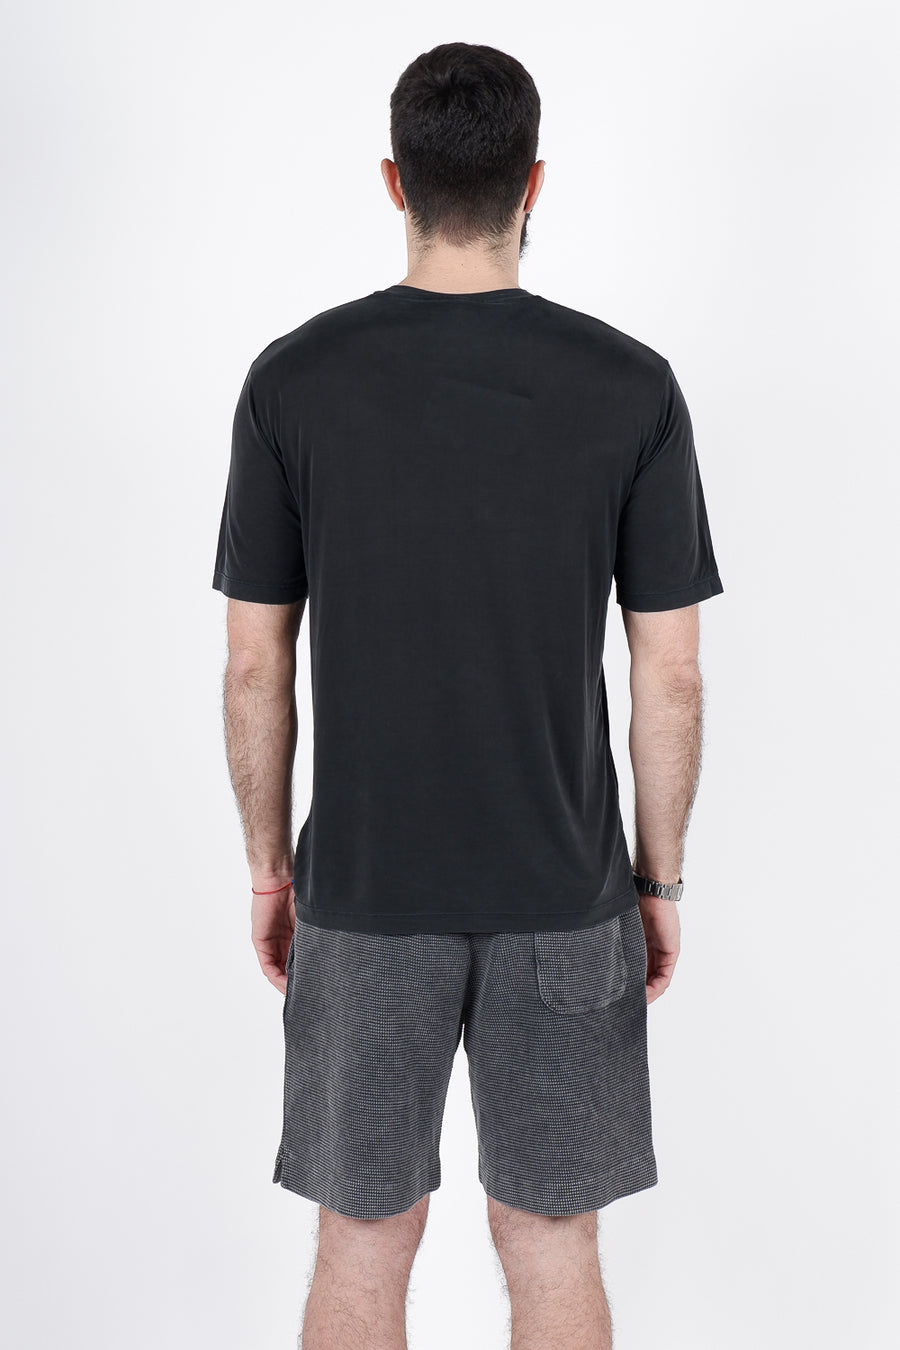 Buy the Daniele Fiesoli Cotton/Silk Round Neck T-Shirt in Black at Intro. Spend £50 for free UK delivery. Official stockists. We ship worldwide.